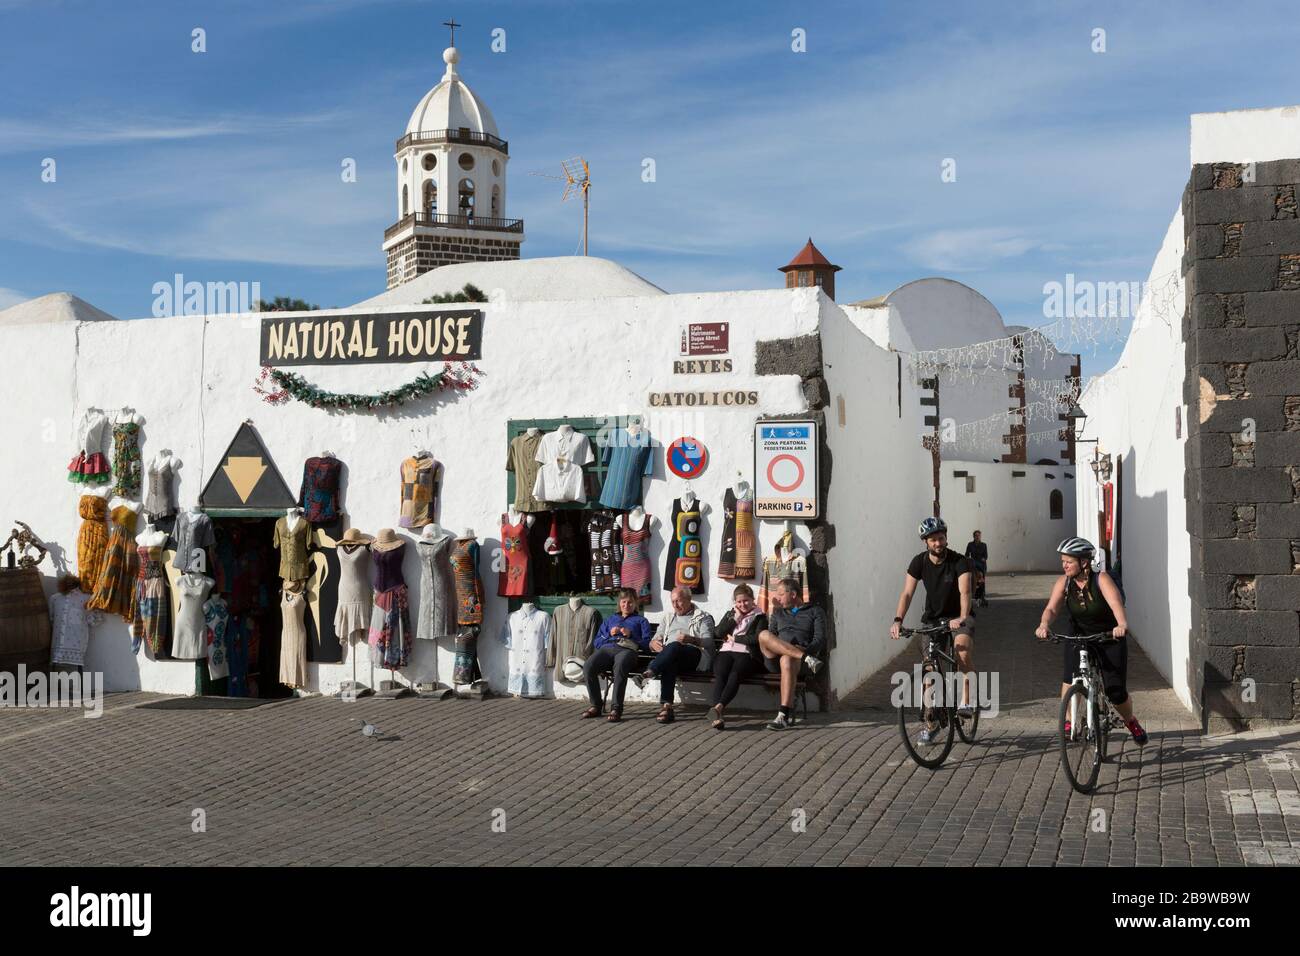 Tourists seated on a bench and on bicycles outside Natural House shop on calle Matrimonio Duque Abreut, Teguise, Lanzarote, Canary Islands, Spain Stock Photo